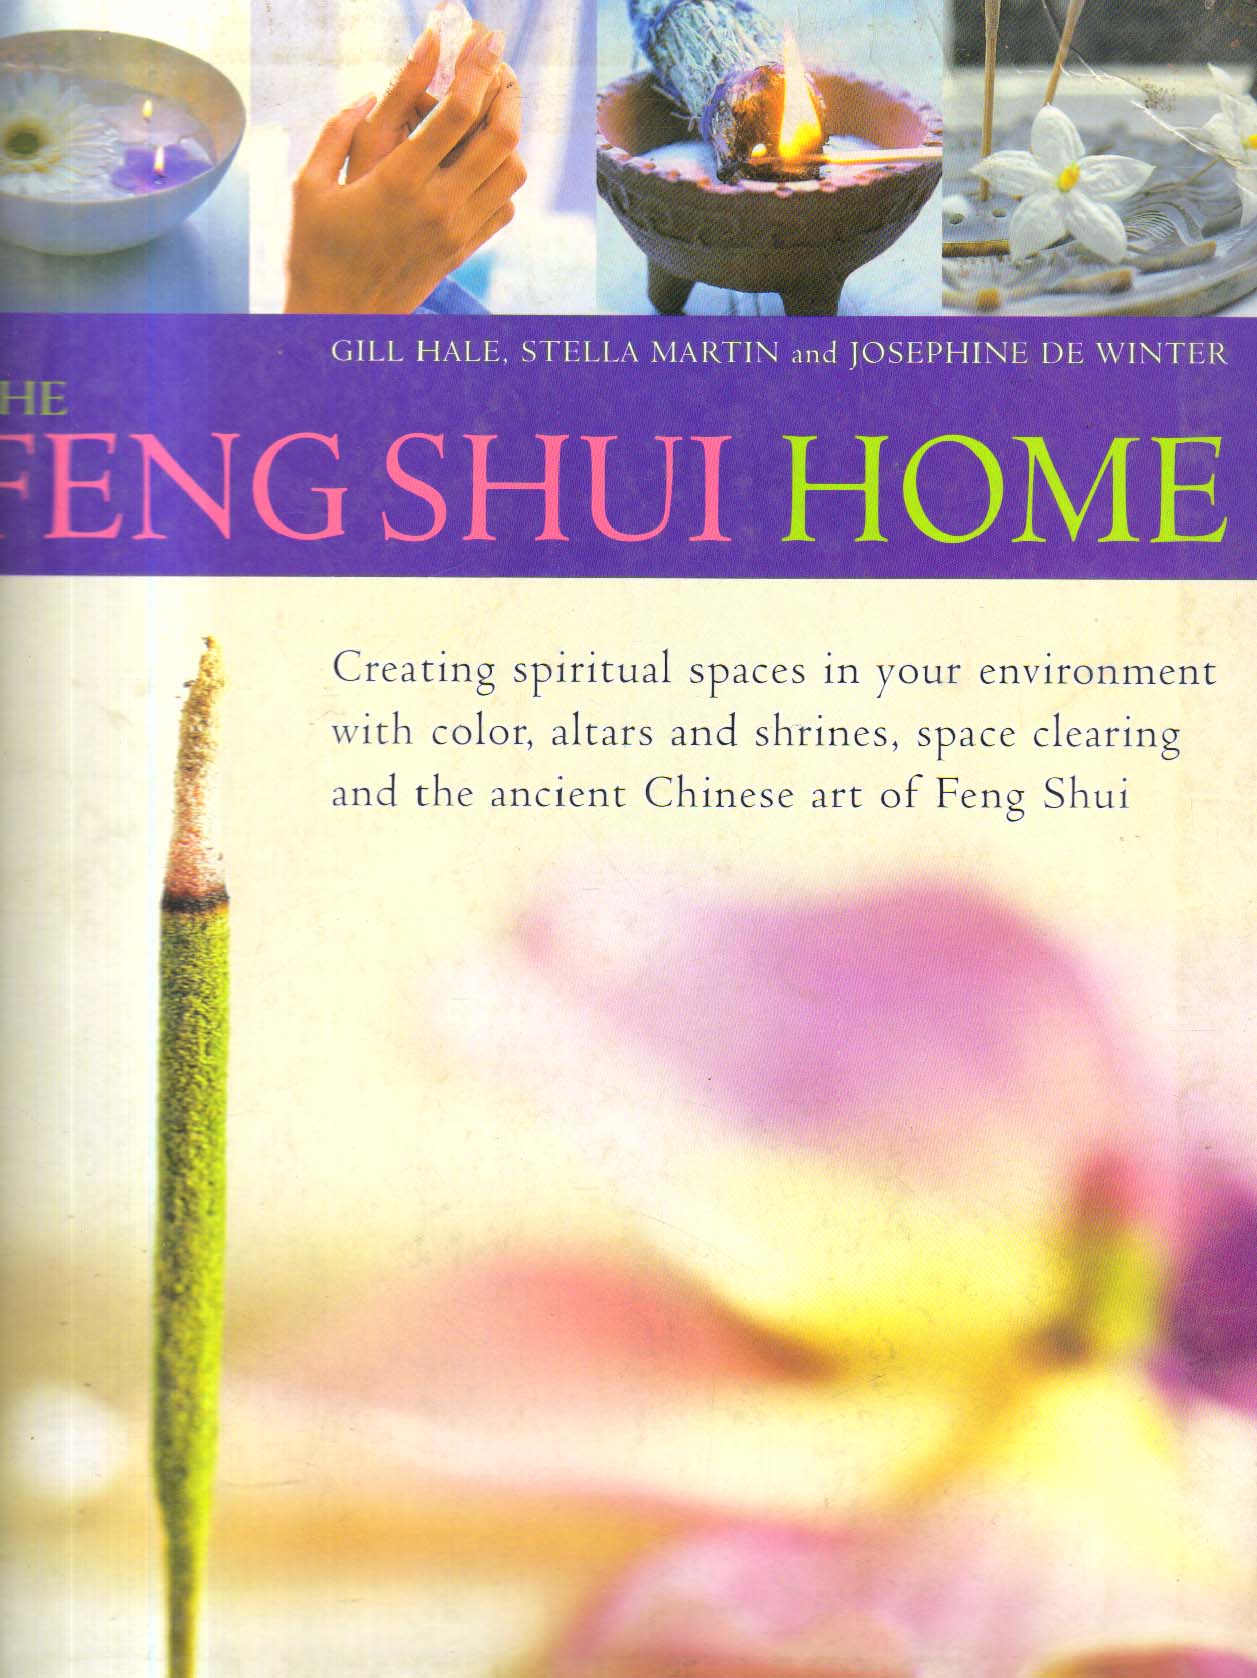 The Fengshui Home.